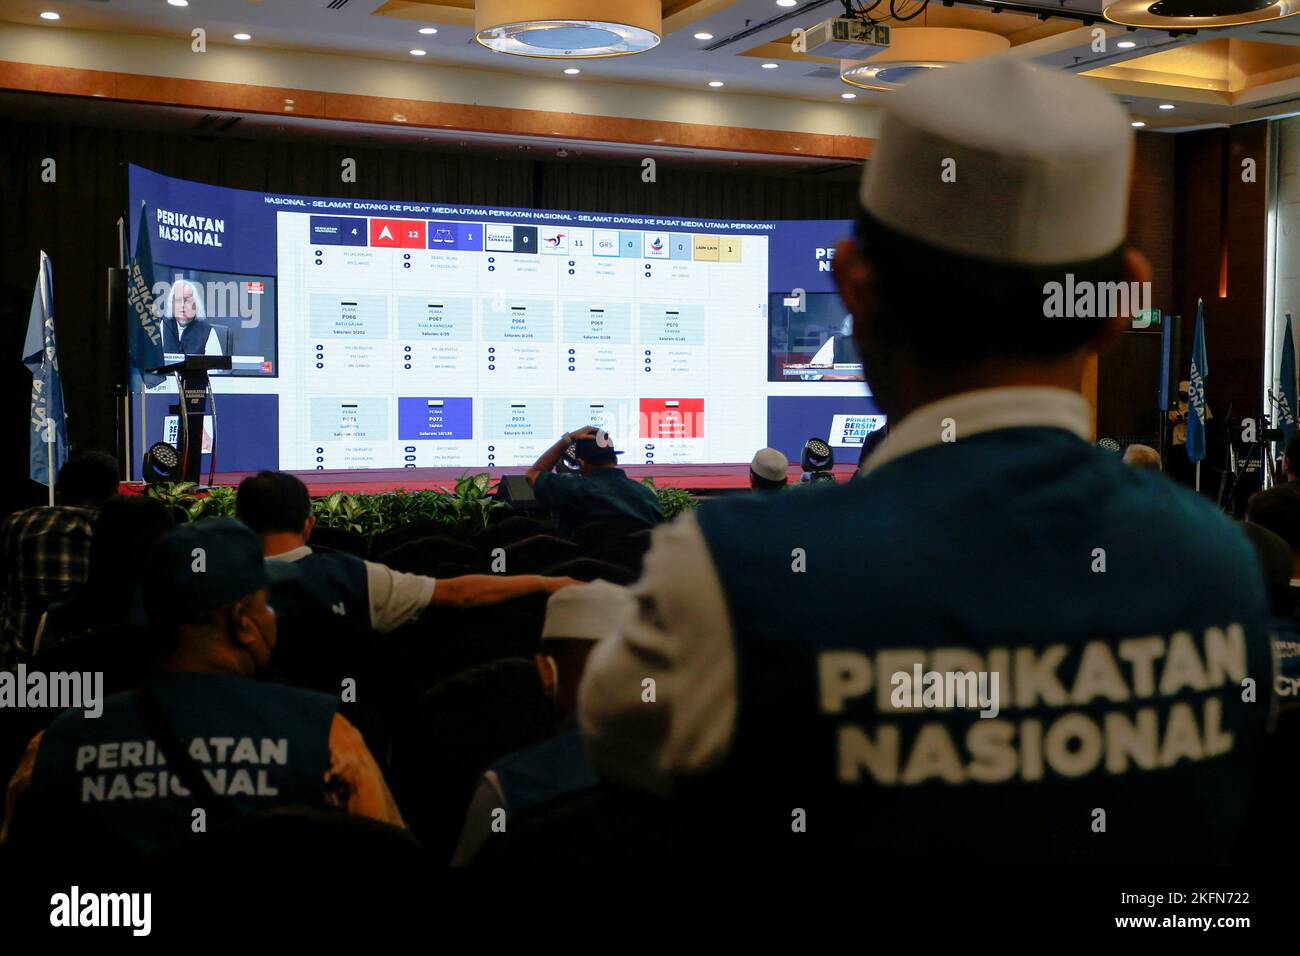 Supporters of Perikatan Nasional watch a video stream for live results of Malaysia's 15th general election at a hotel in Shah Alam, Malaysia November 19, 2022. REUTERS/Lai Seng Sin Stock Photo